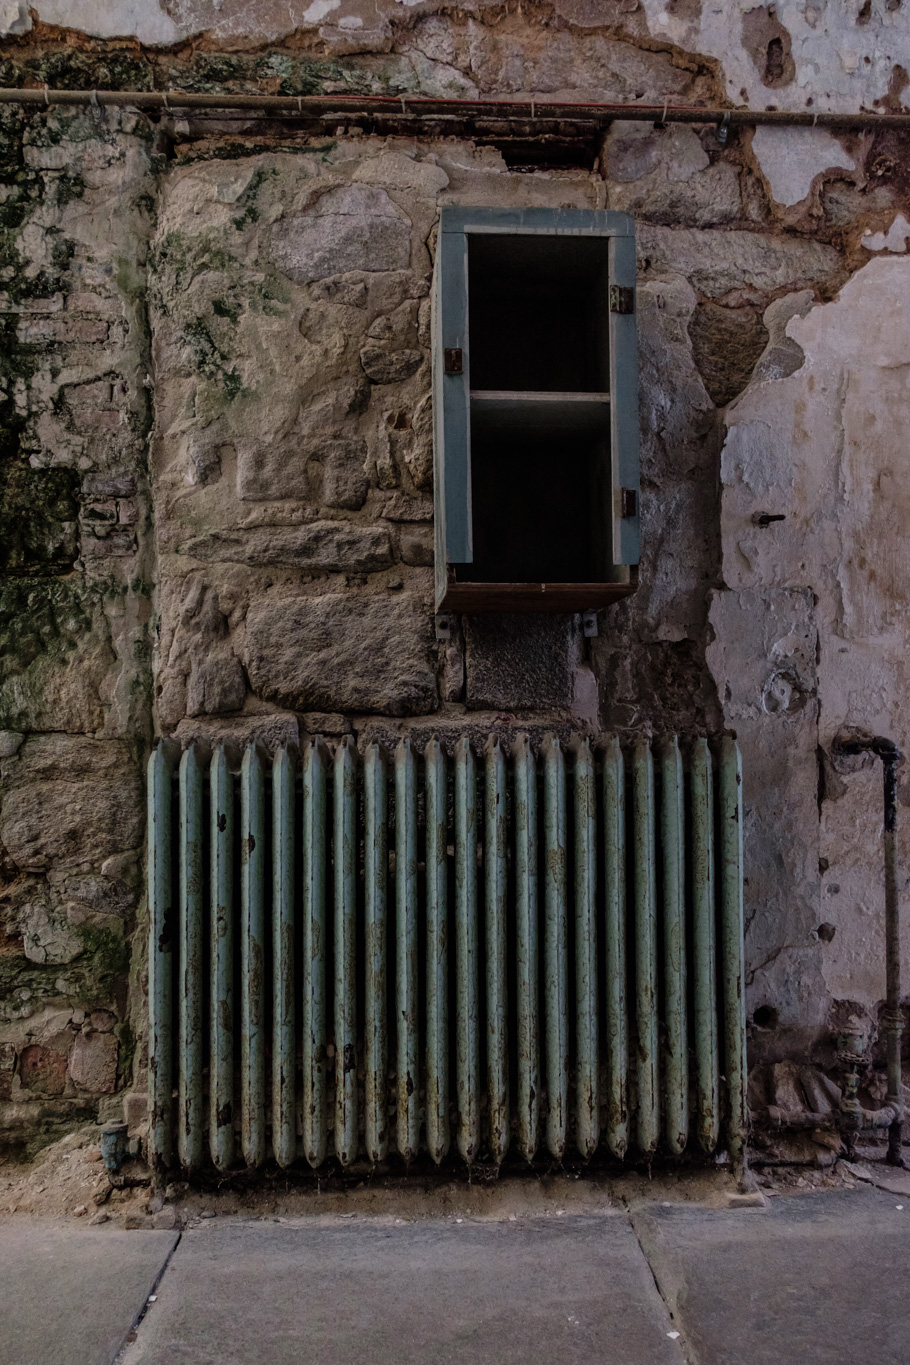 a radiator next to a wall in the shade